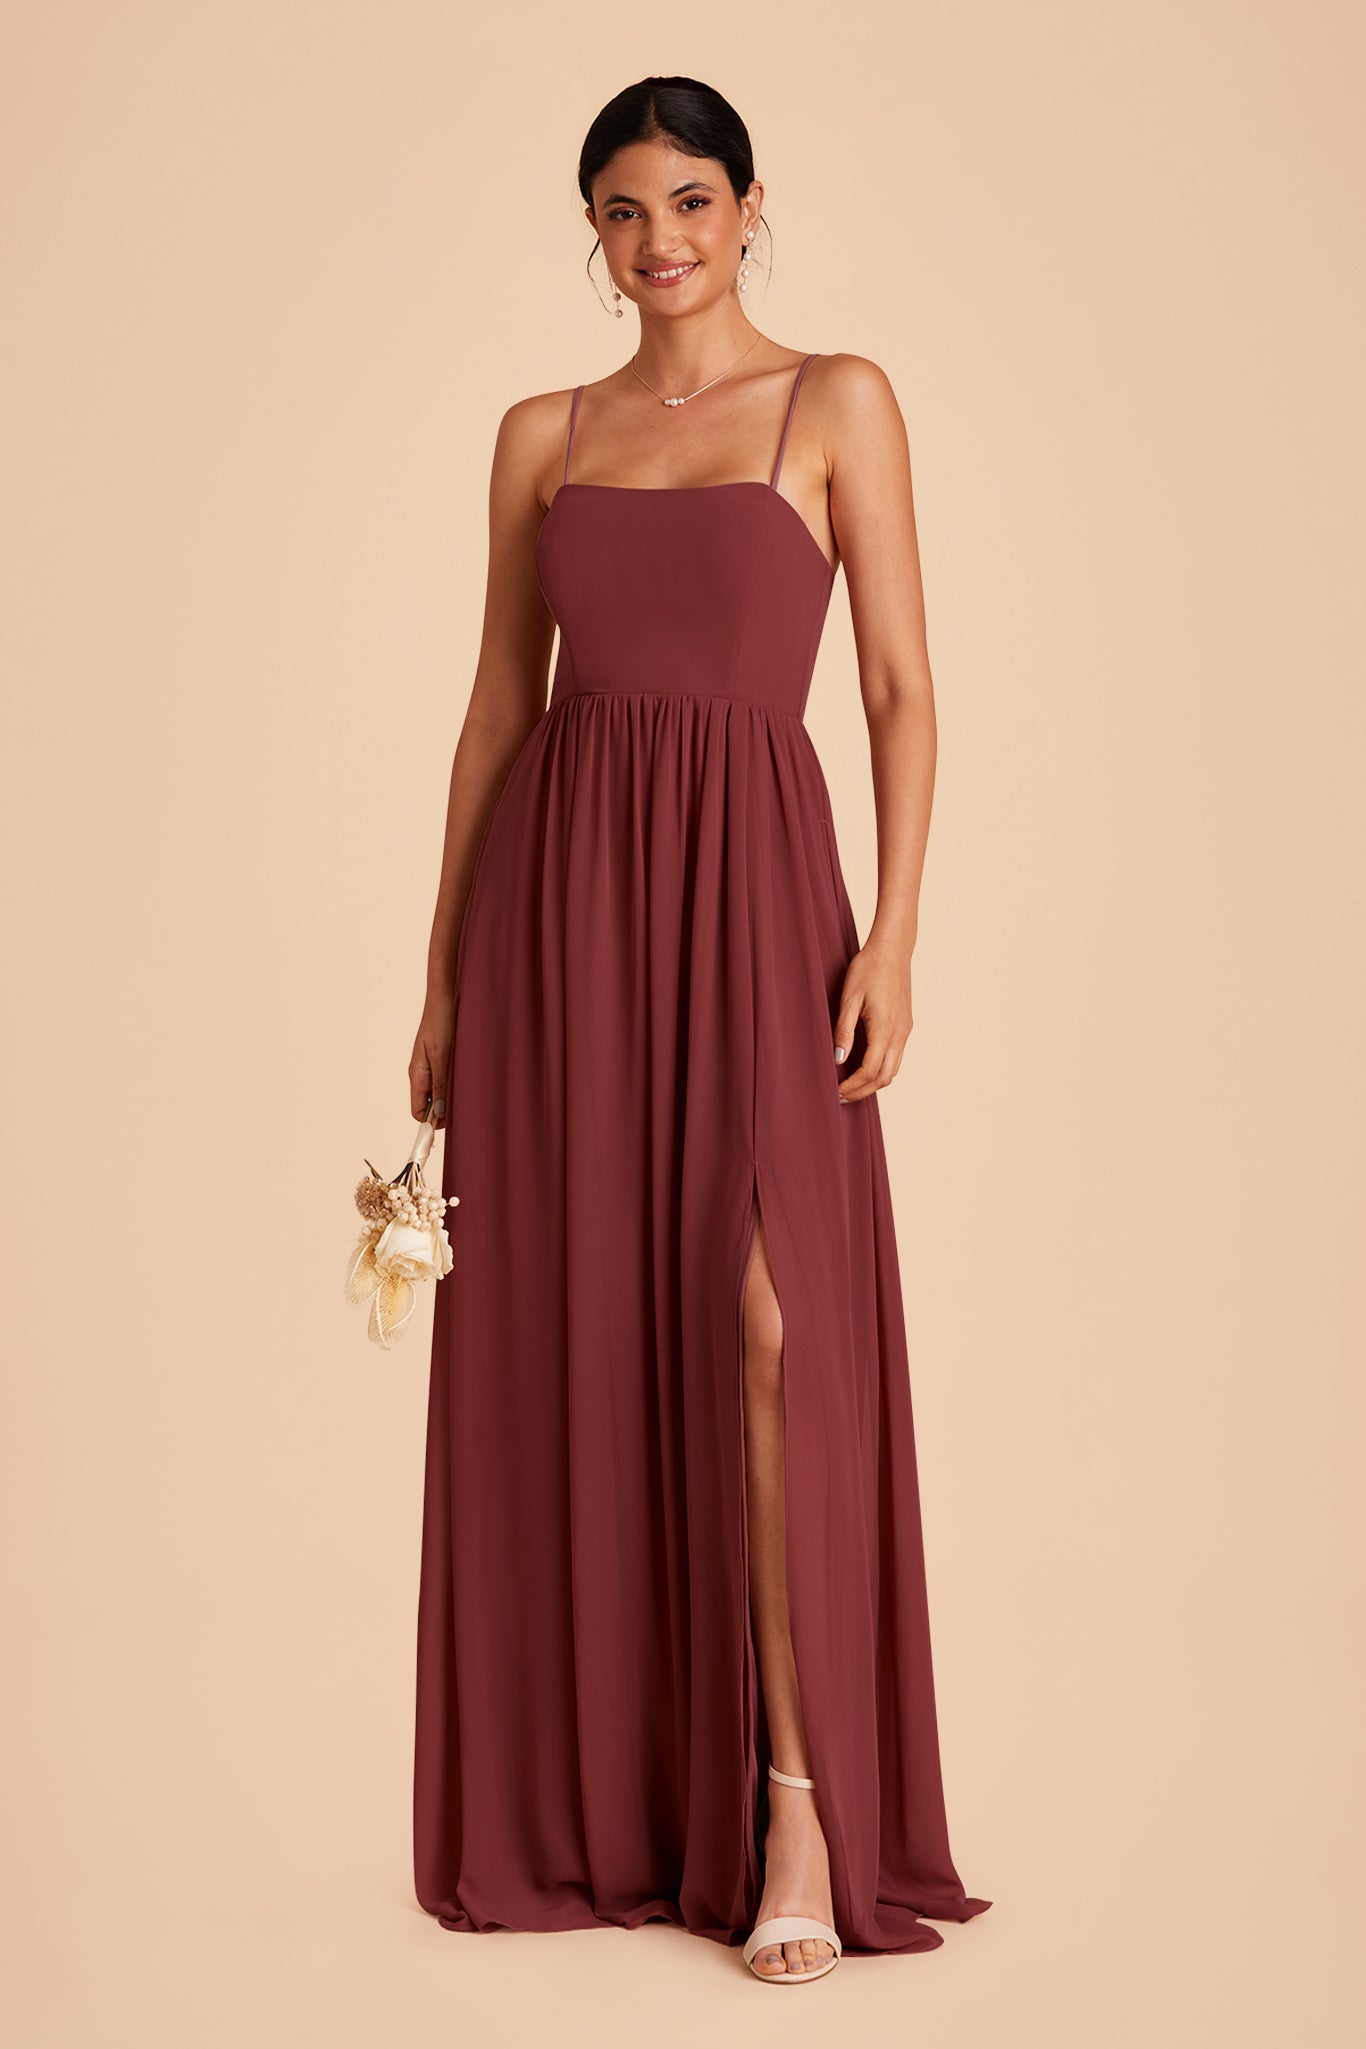 August bridesmaid dress with slit in rosewood chiffon by Birdy Grey, front view